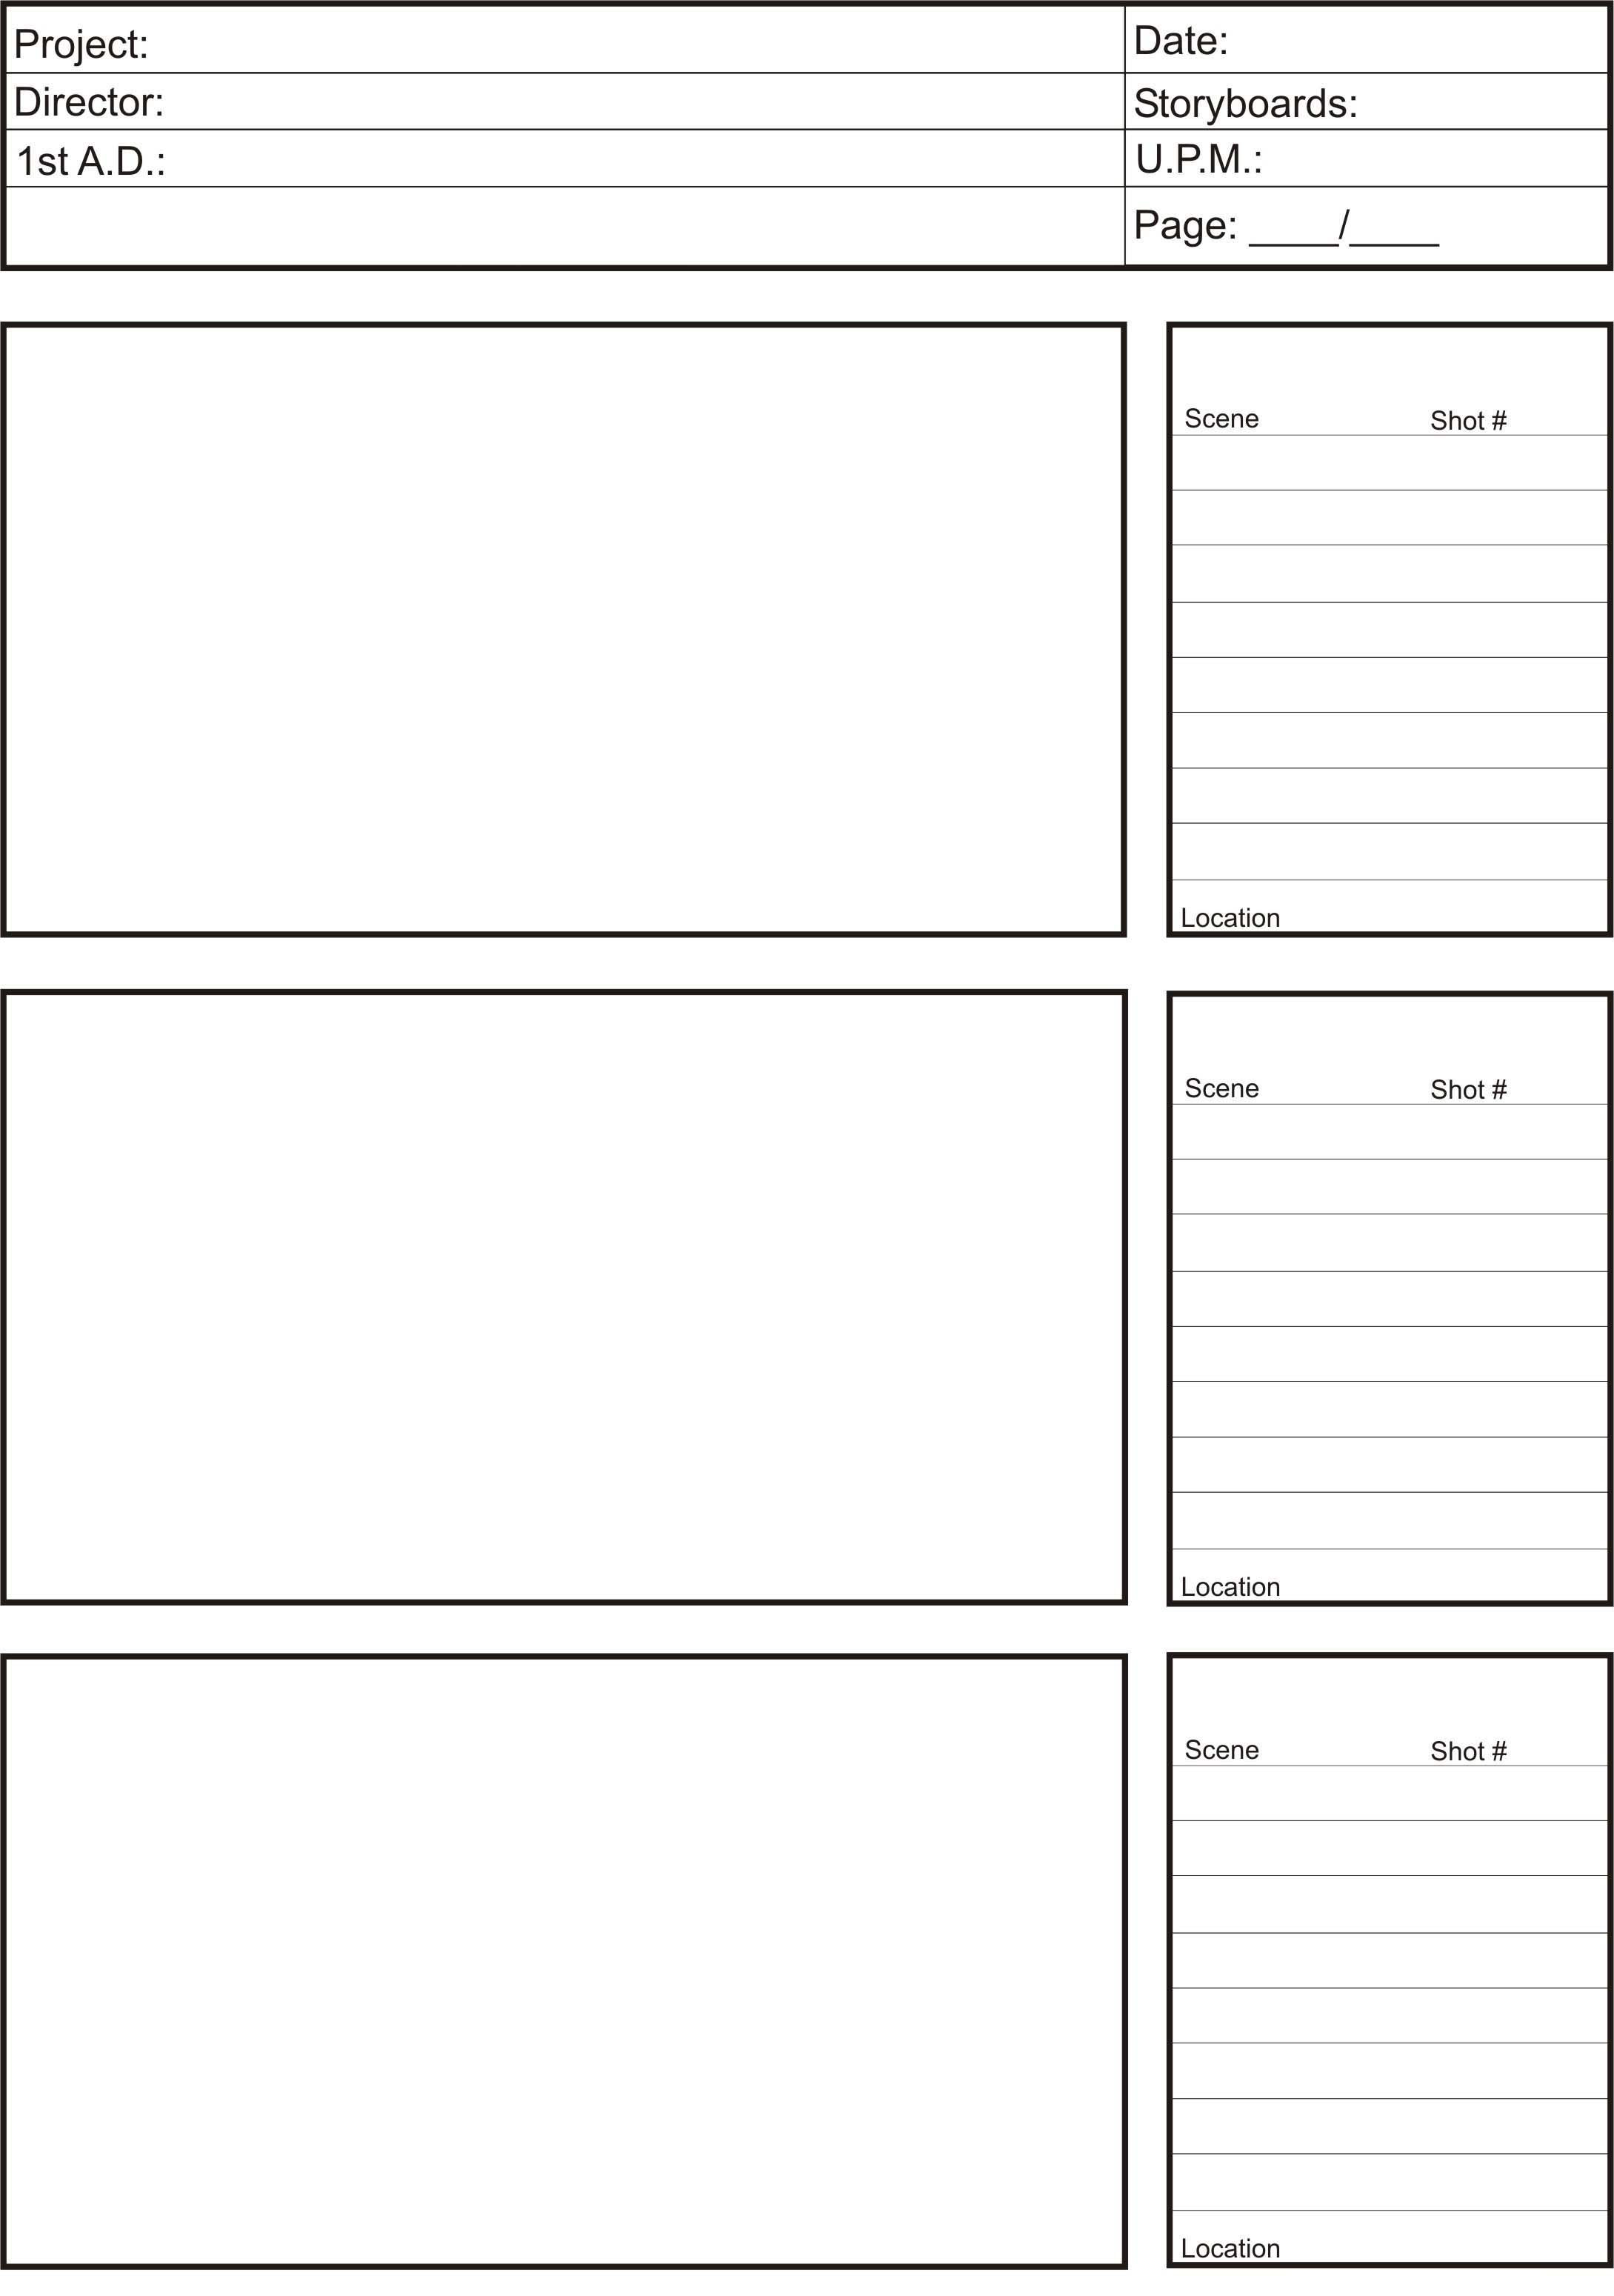 Storyboard Template Excel from bgsu.instructure.com